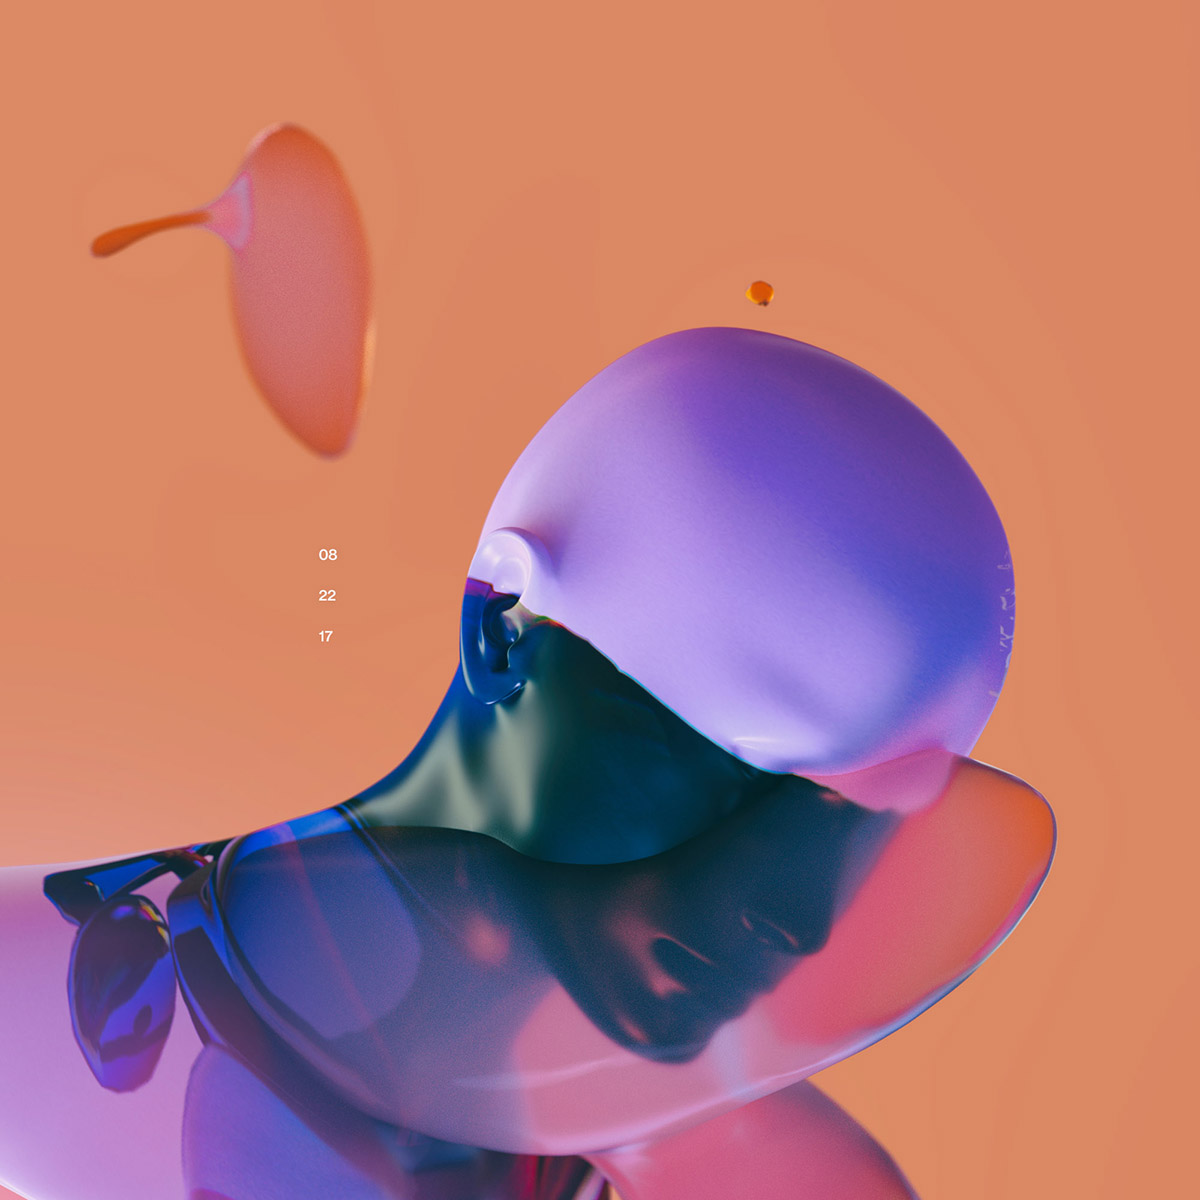 Digital rendering of humanoid android figure, looking down from side, drips with lavenders and blues on hot peach background. Small white text shows numbers.